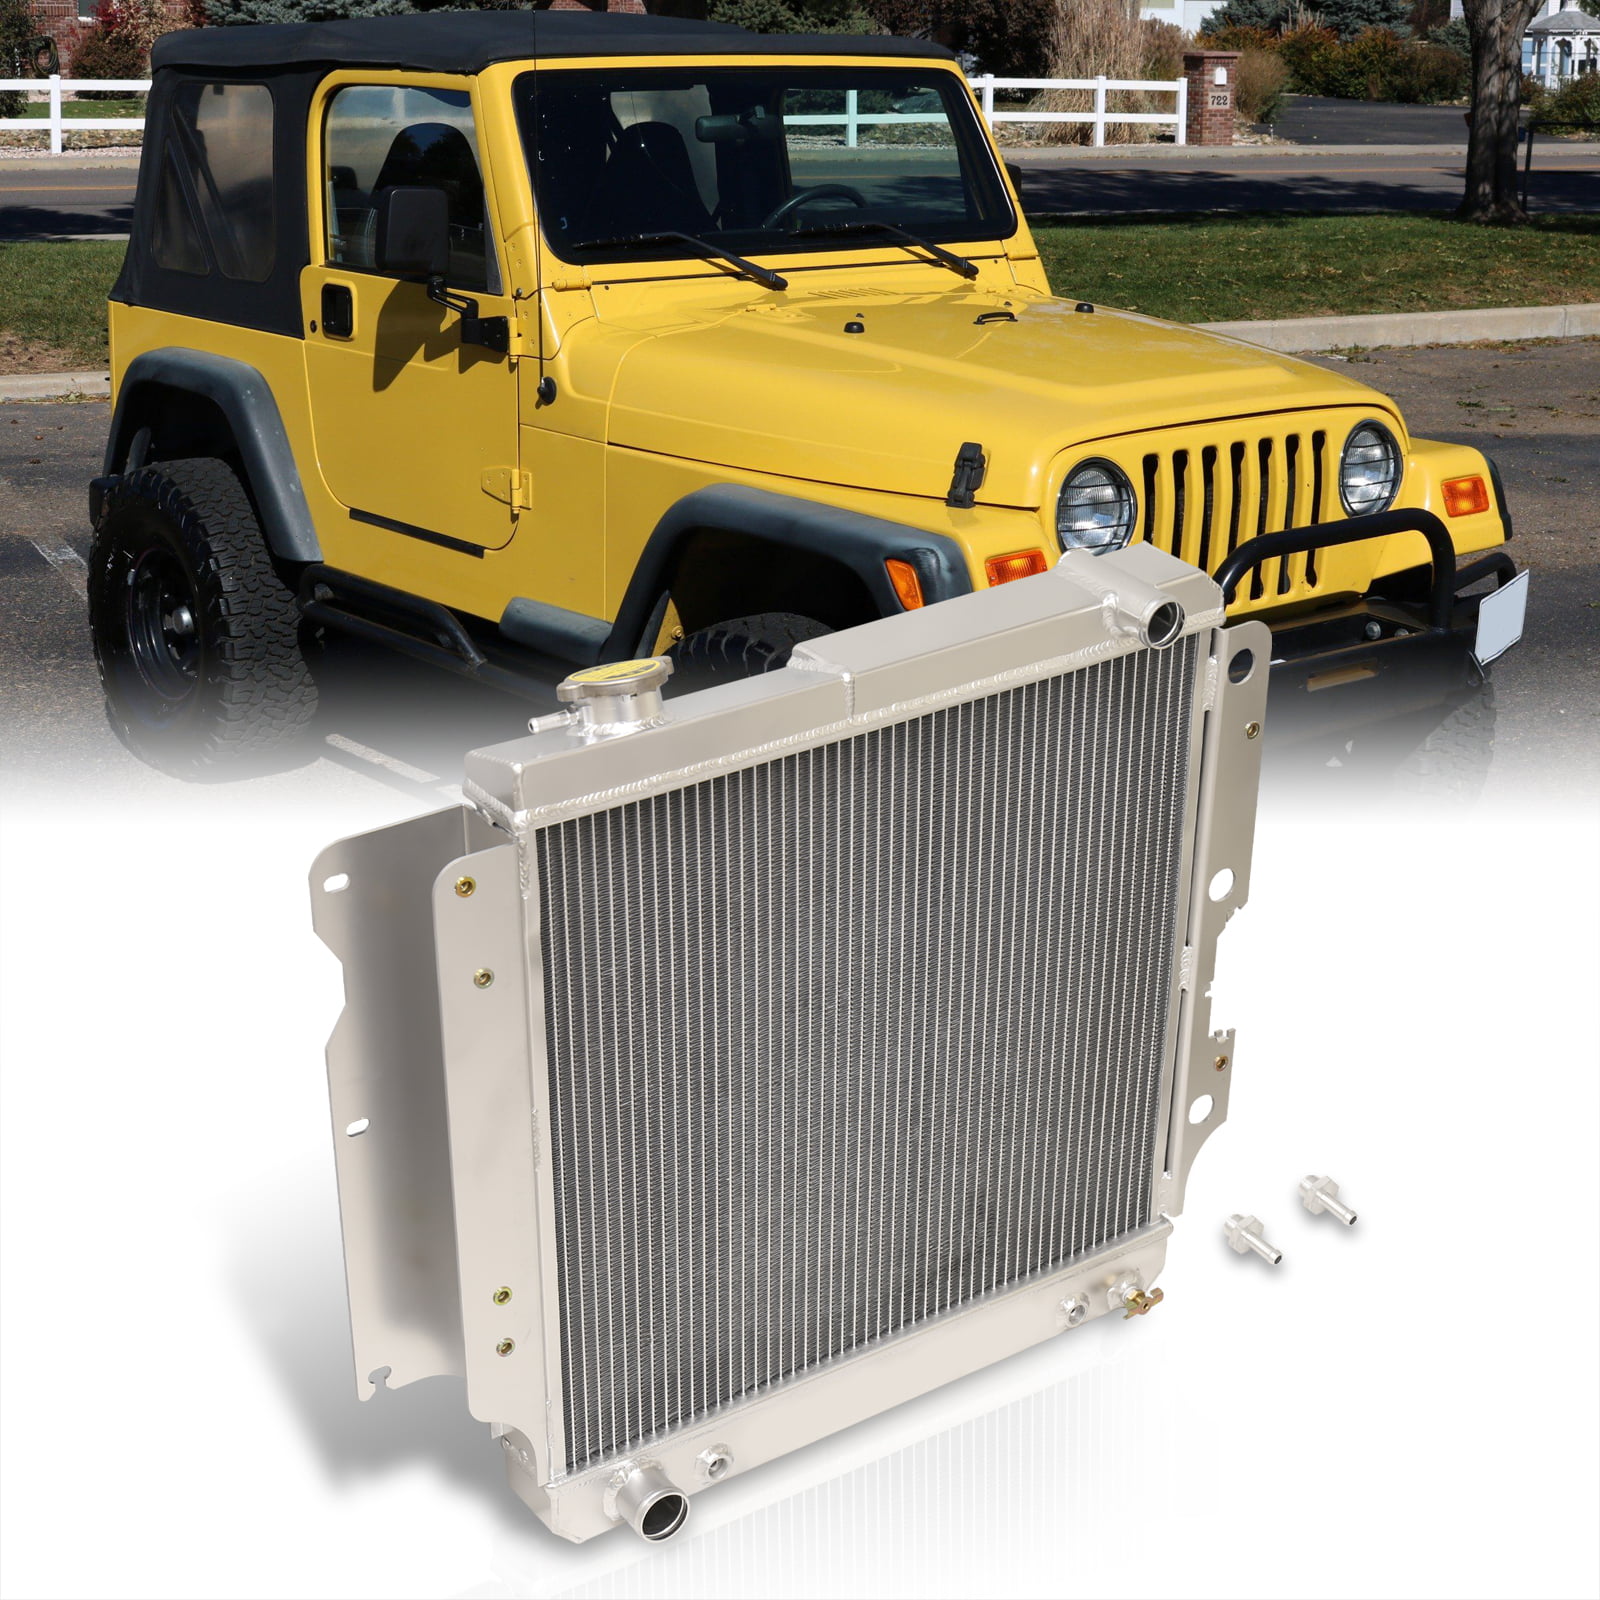 AJP Distributors 3-Row Aluminum Radiator Compatible/Replacement For Jeep  Wrangler YJ TJ Automatic AT 1987 1988 1989 1990 1991 1992 1993 1994 1995  1996 1997 1998 1999 2000 2001 2002 2003 2004 2005 2006 